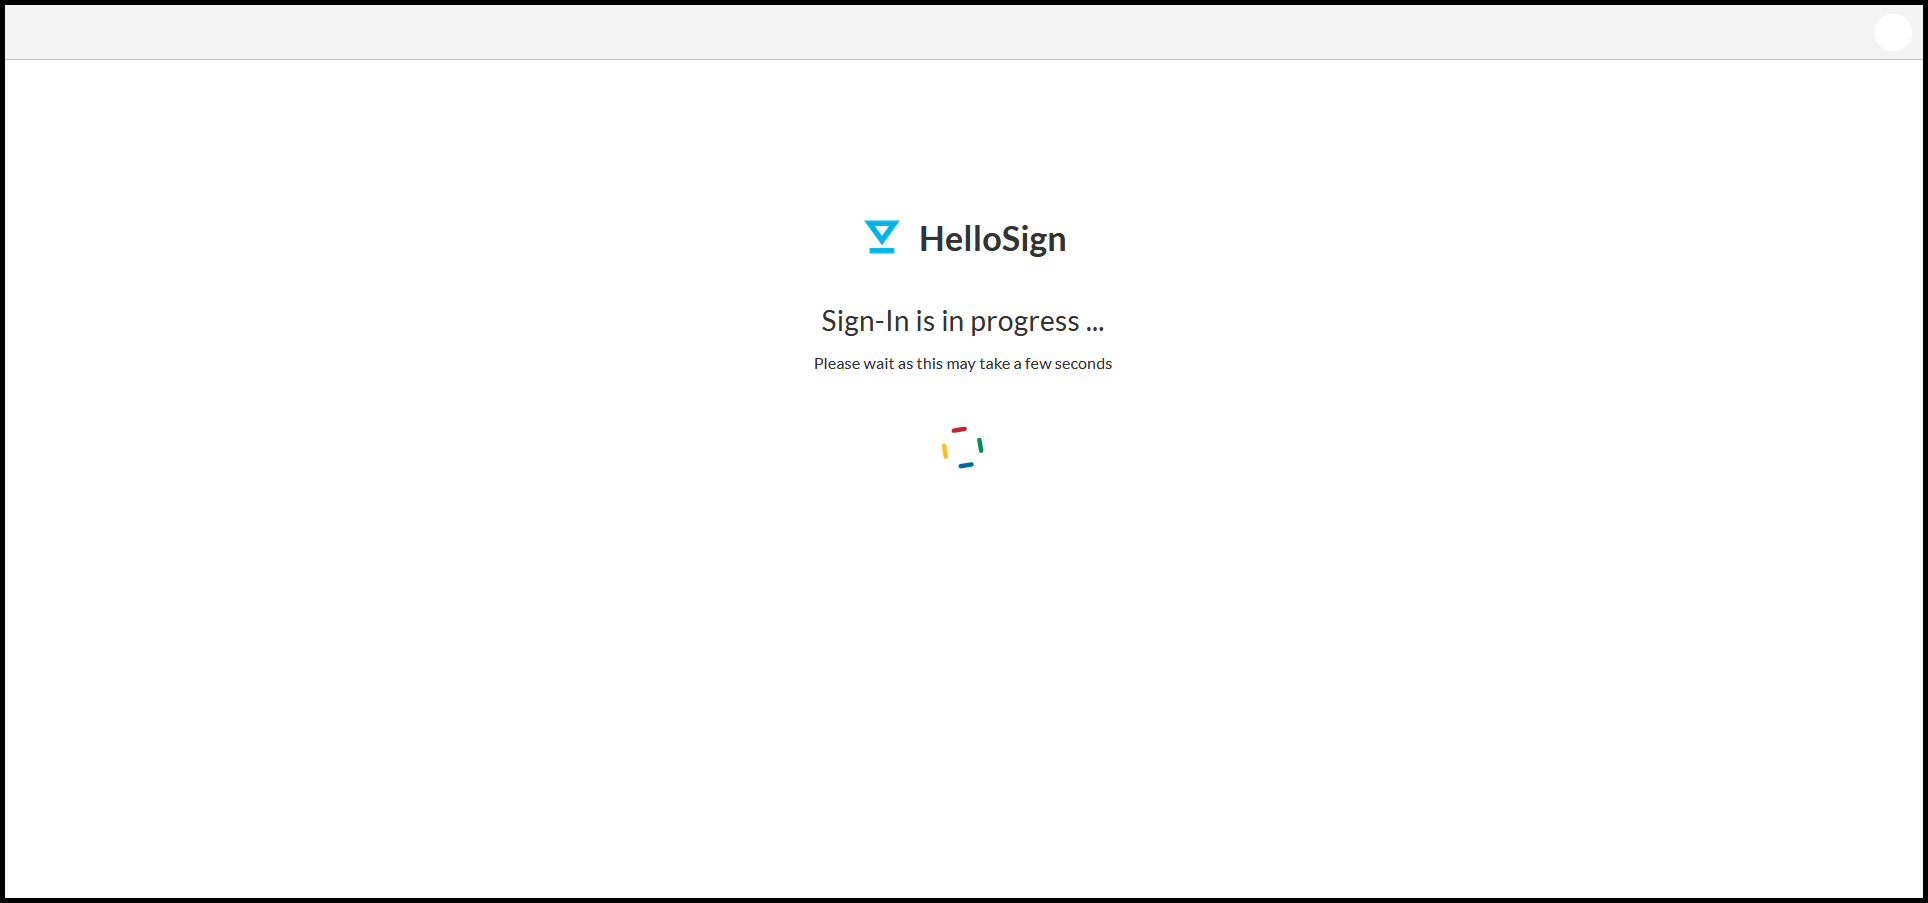 Signing in to HelloSign with SSO